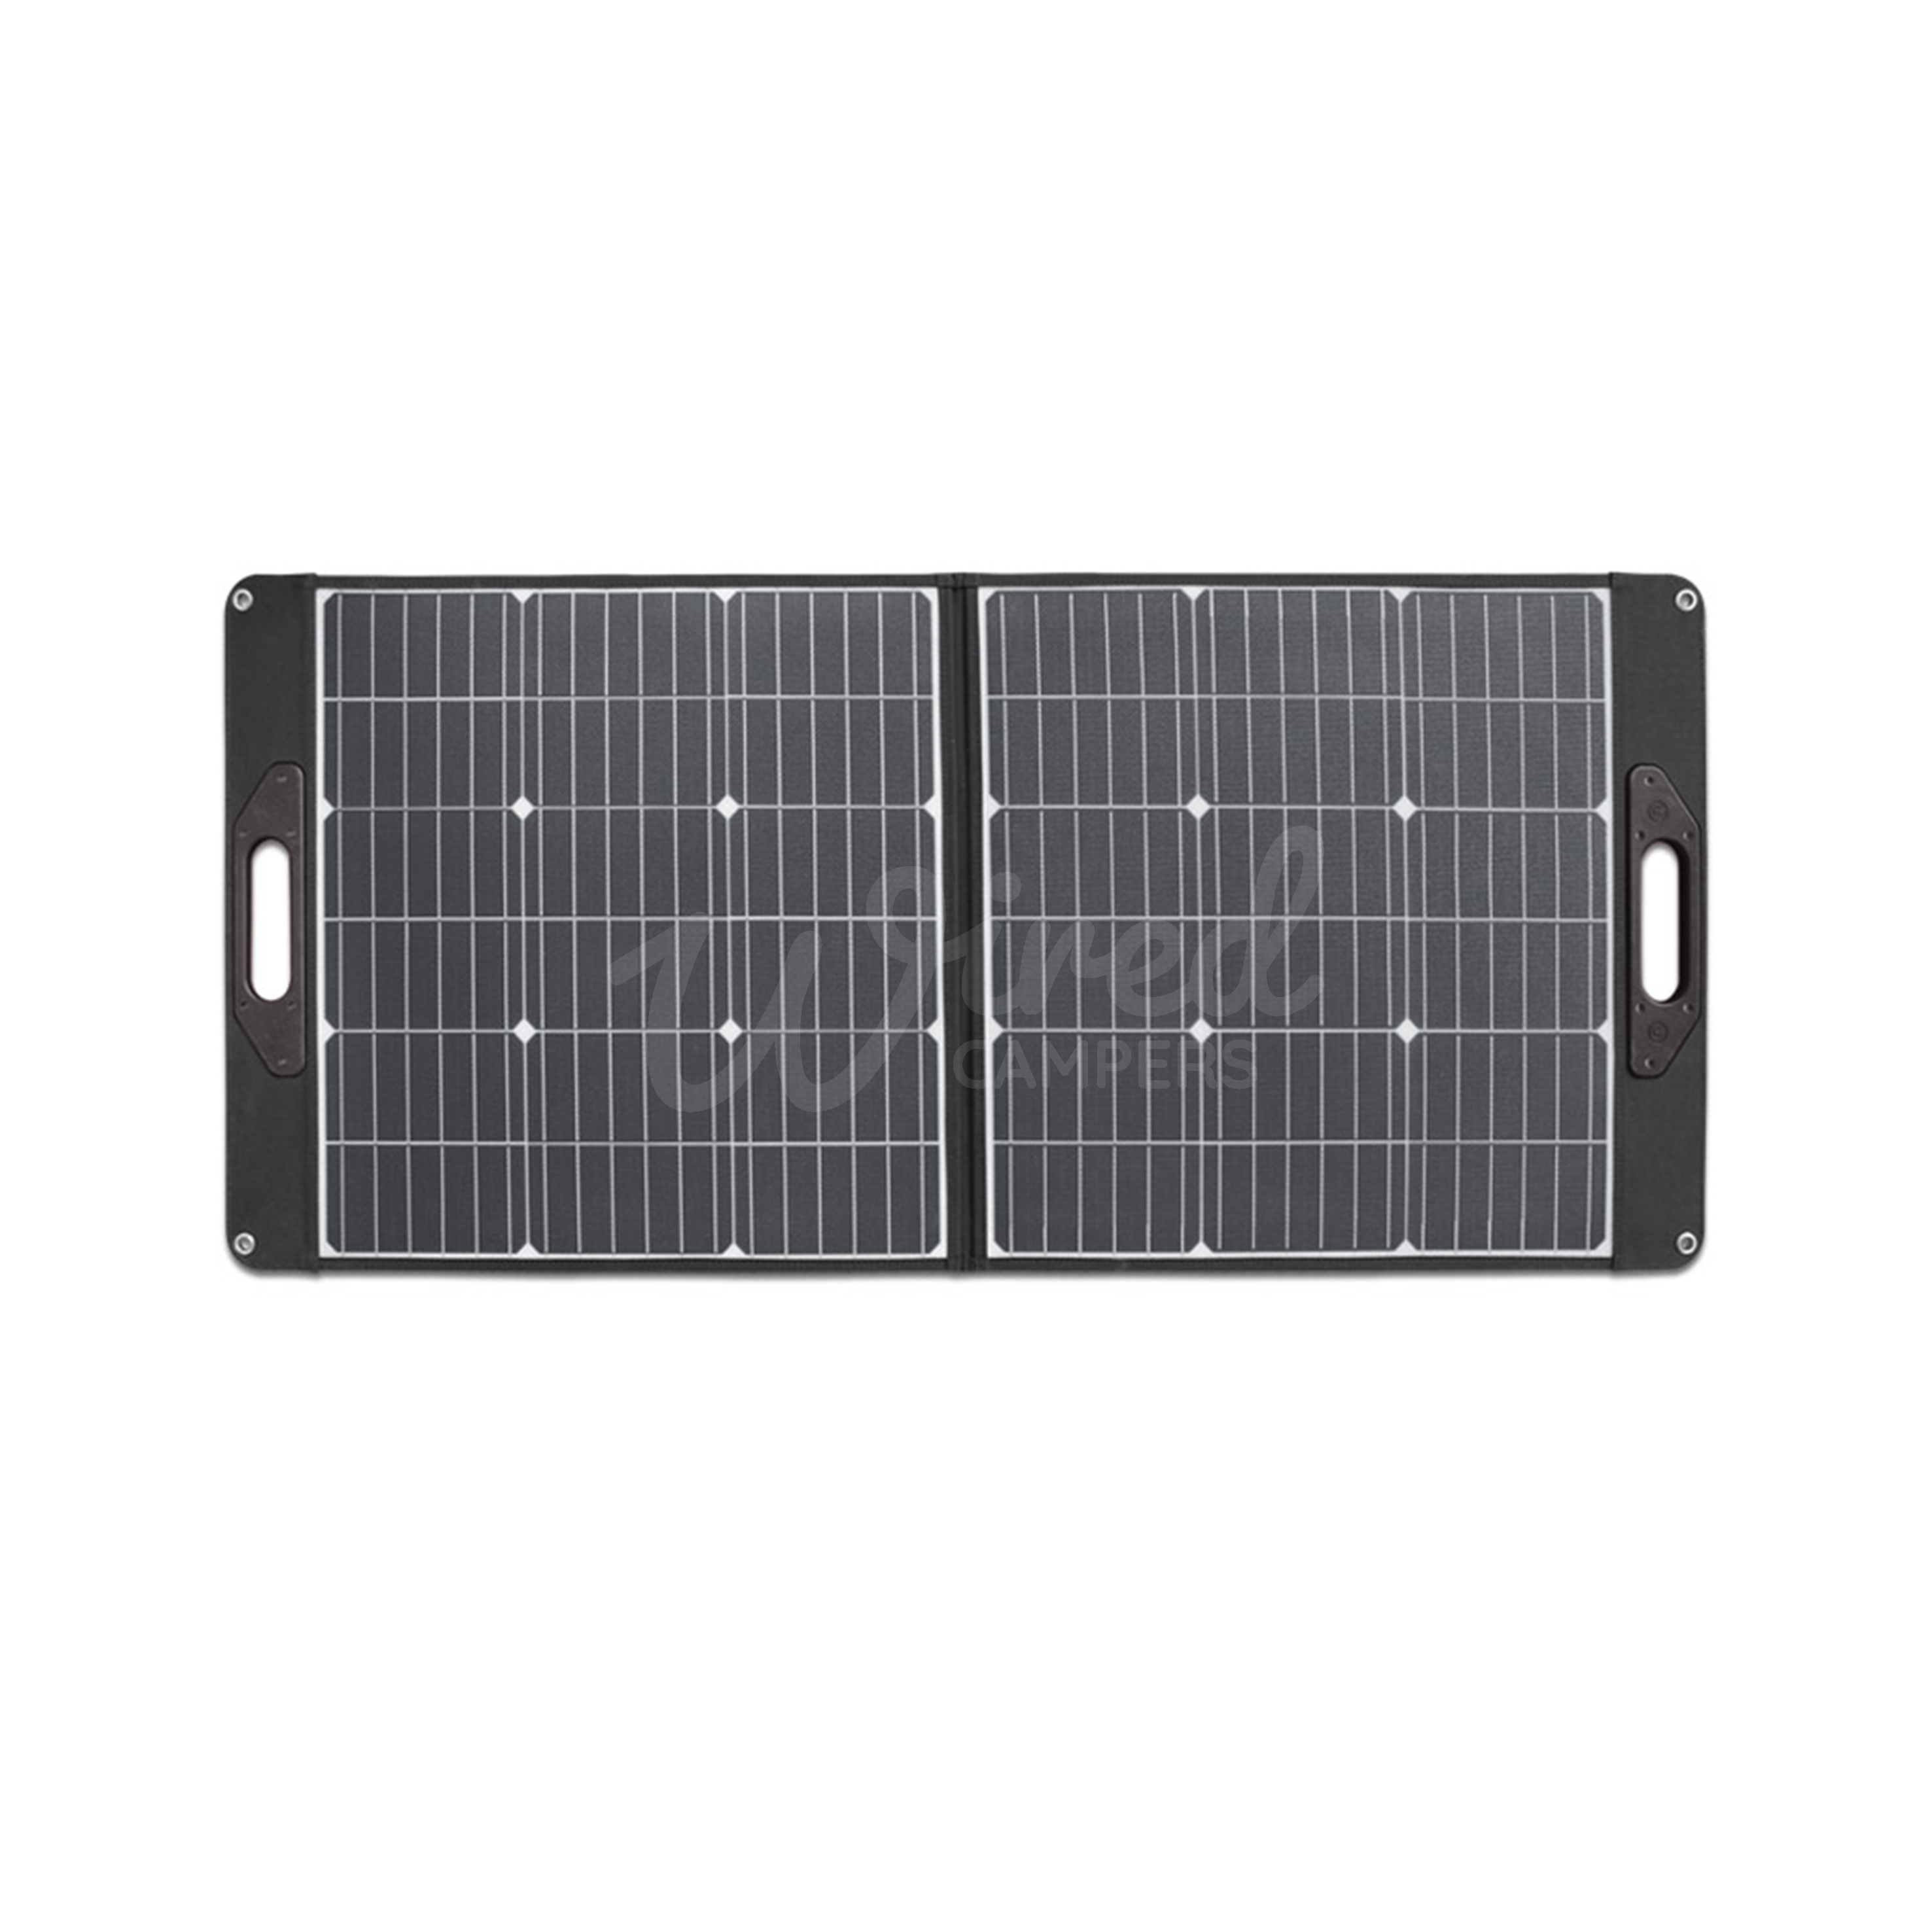 Wired Campers Limited 100W Portable Outdoor Foldable MONO Camping Solar PV Panel